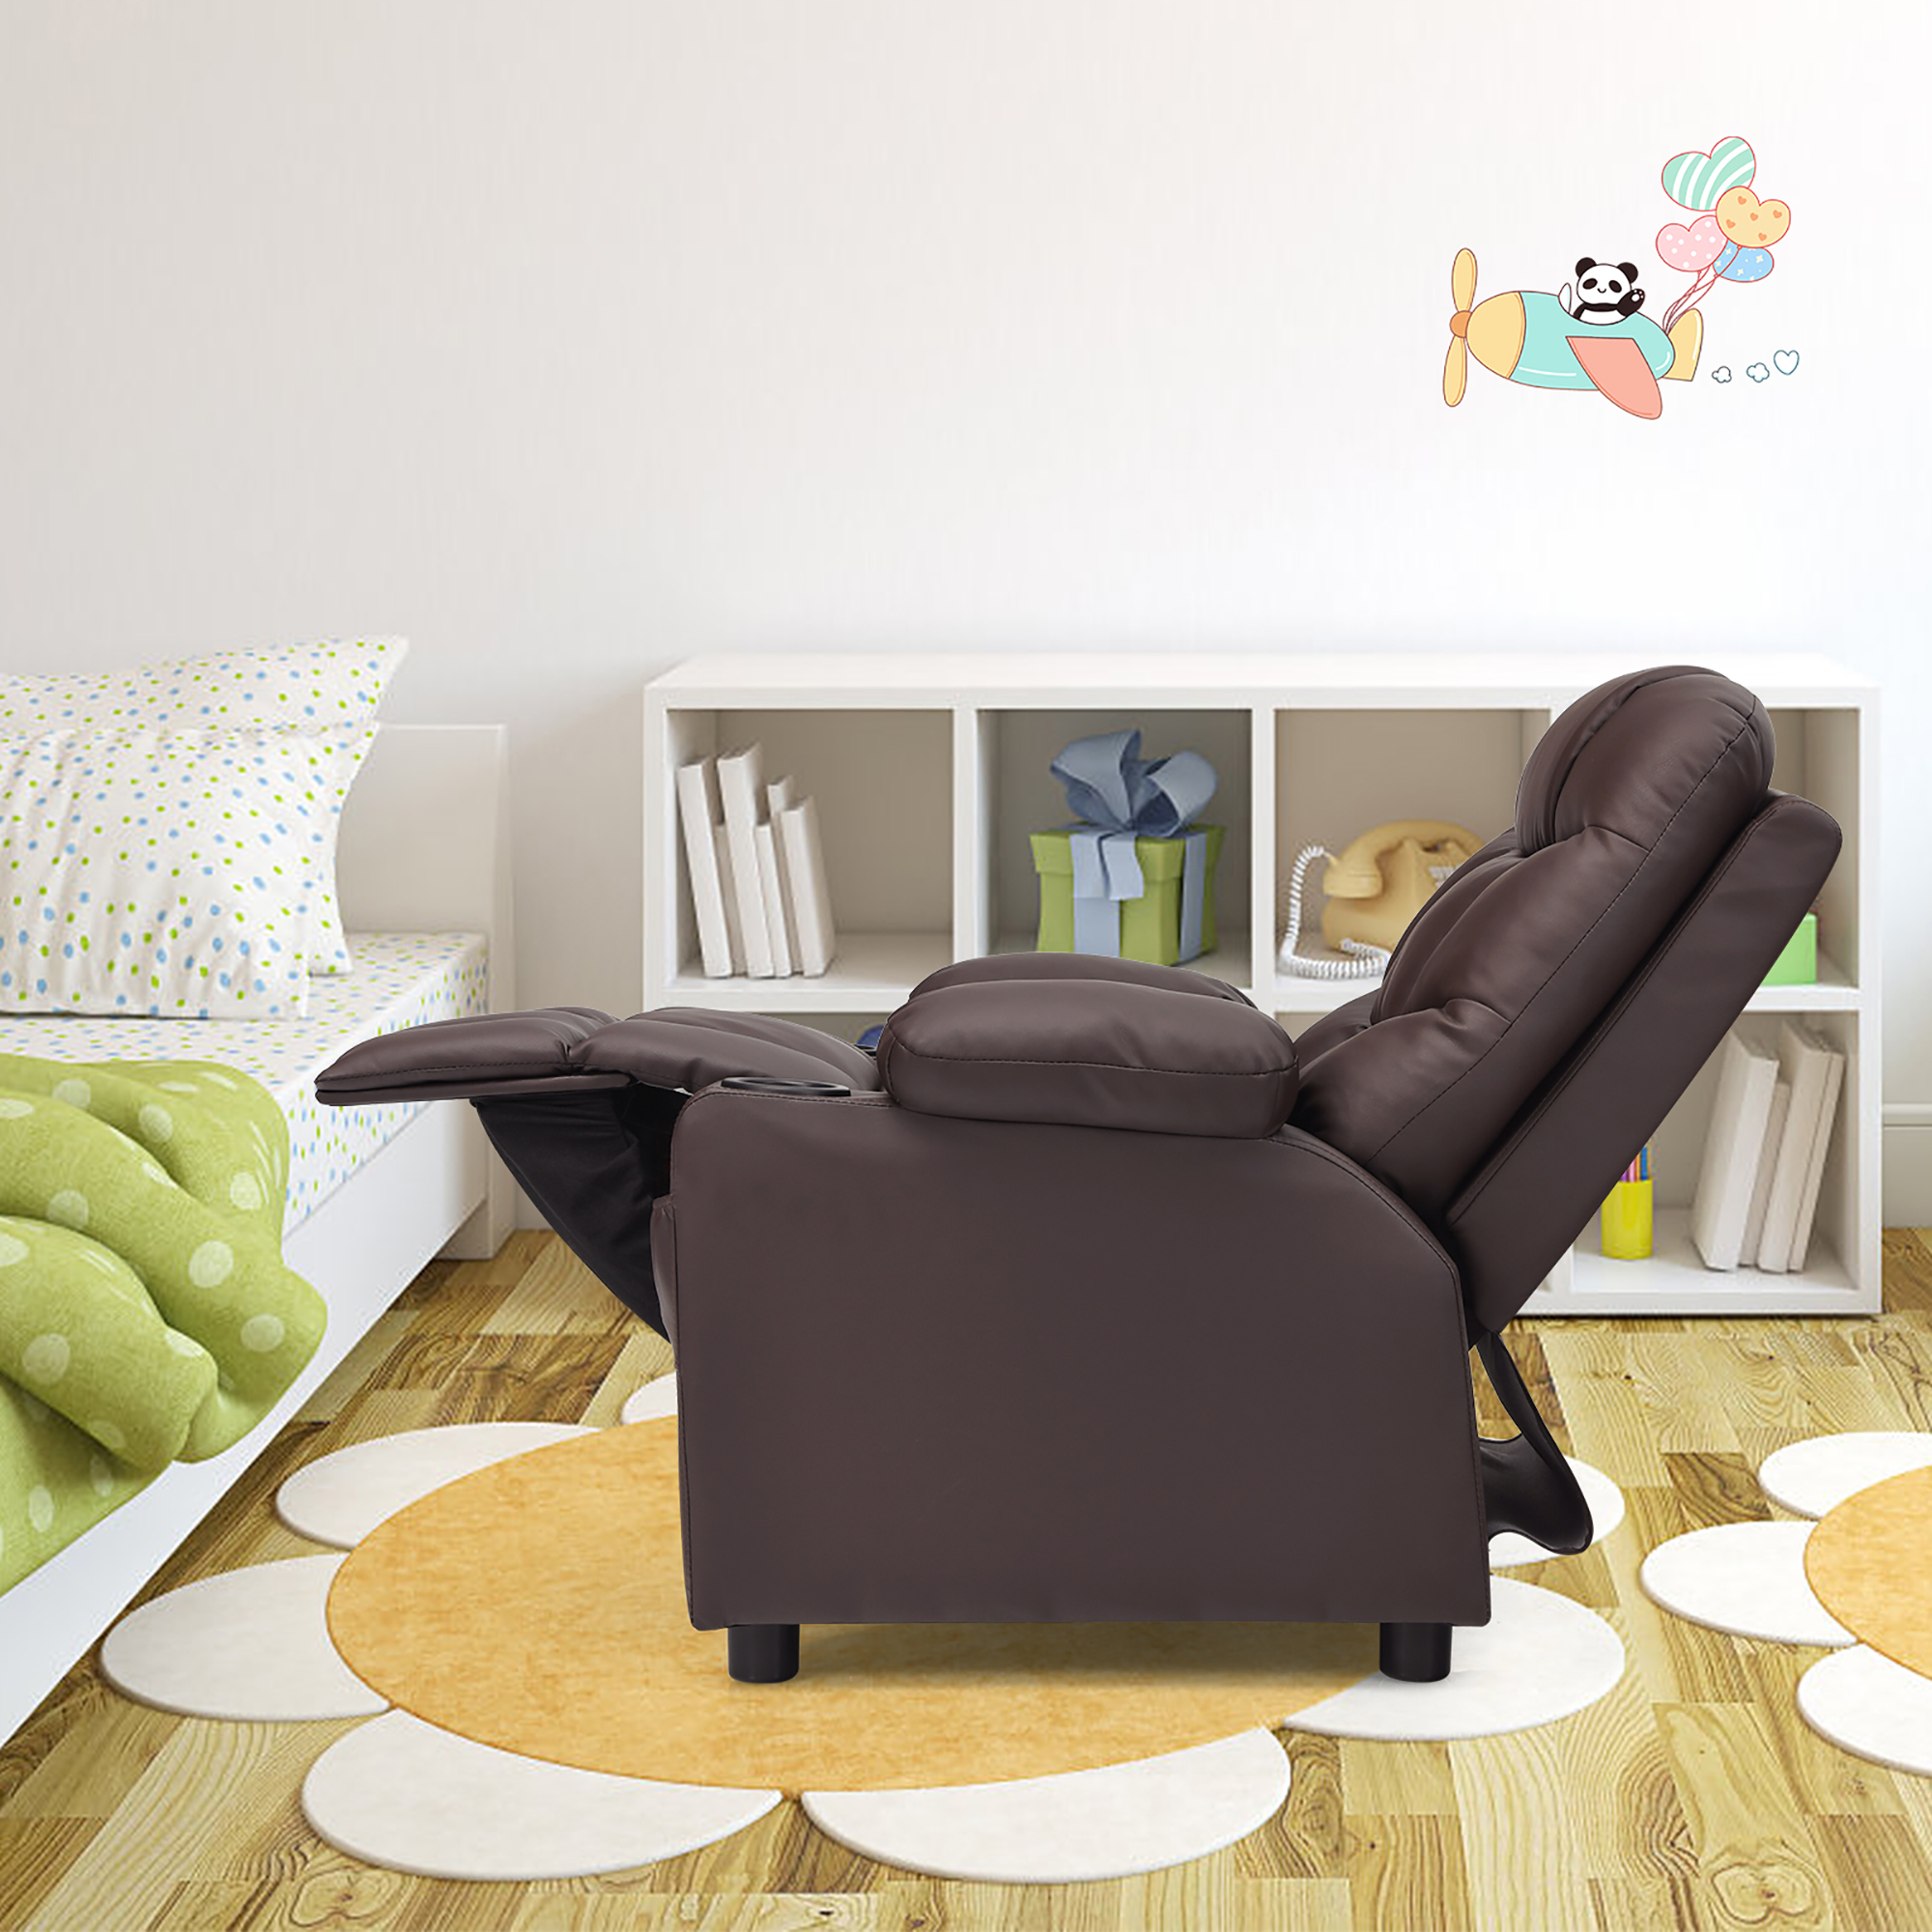 Costway Kids Youth Recliner Chair PU Leather w/Cup Holders & Side Pockets Brown